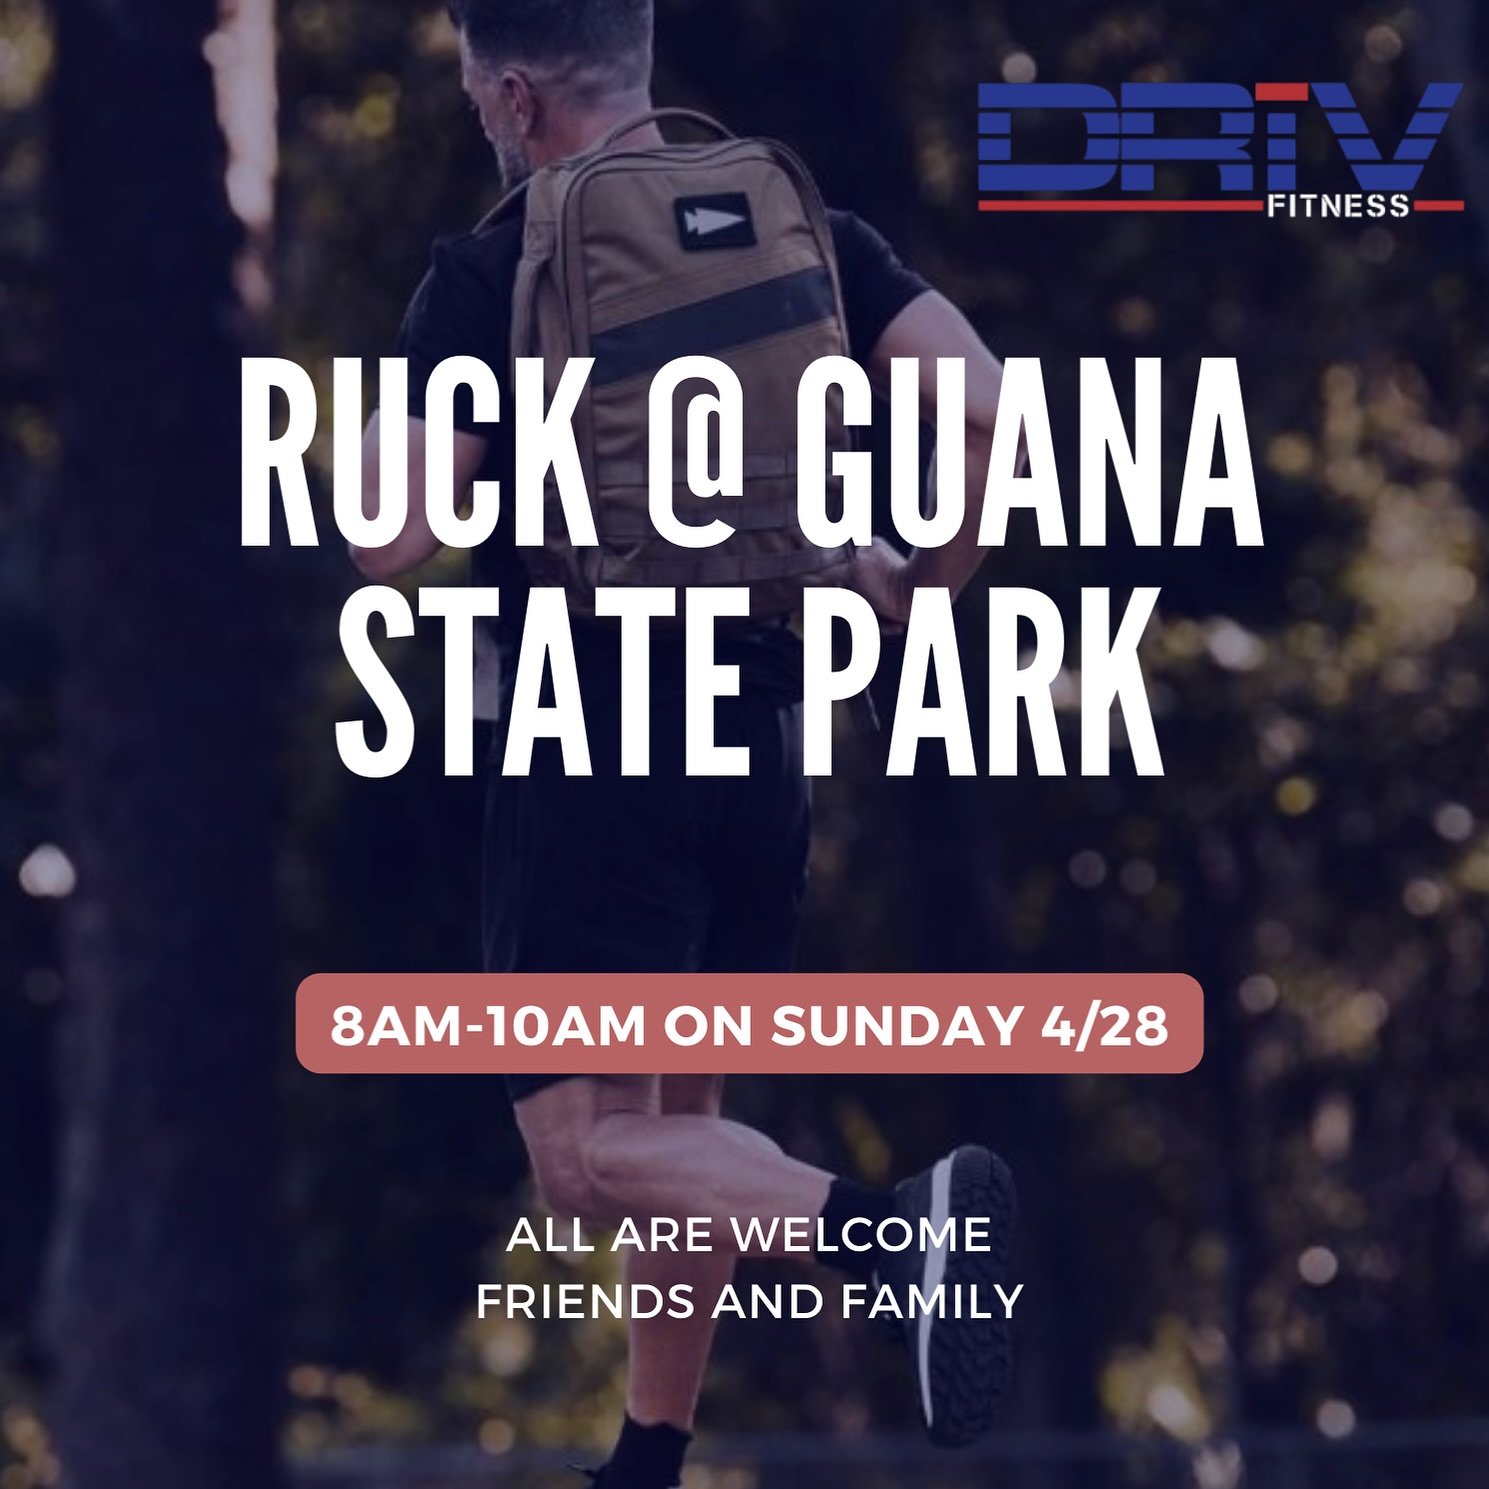 Let&rsquo;s get that extra fitness in this Sunday at Guana State Park (next to the Exxon)

Coach Mindi is gonna be waiting for you at the main entrance. All are welcome!

Ruck with weight or just walk the trail, you choose. 
Bring plenty of water + s